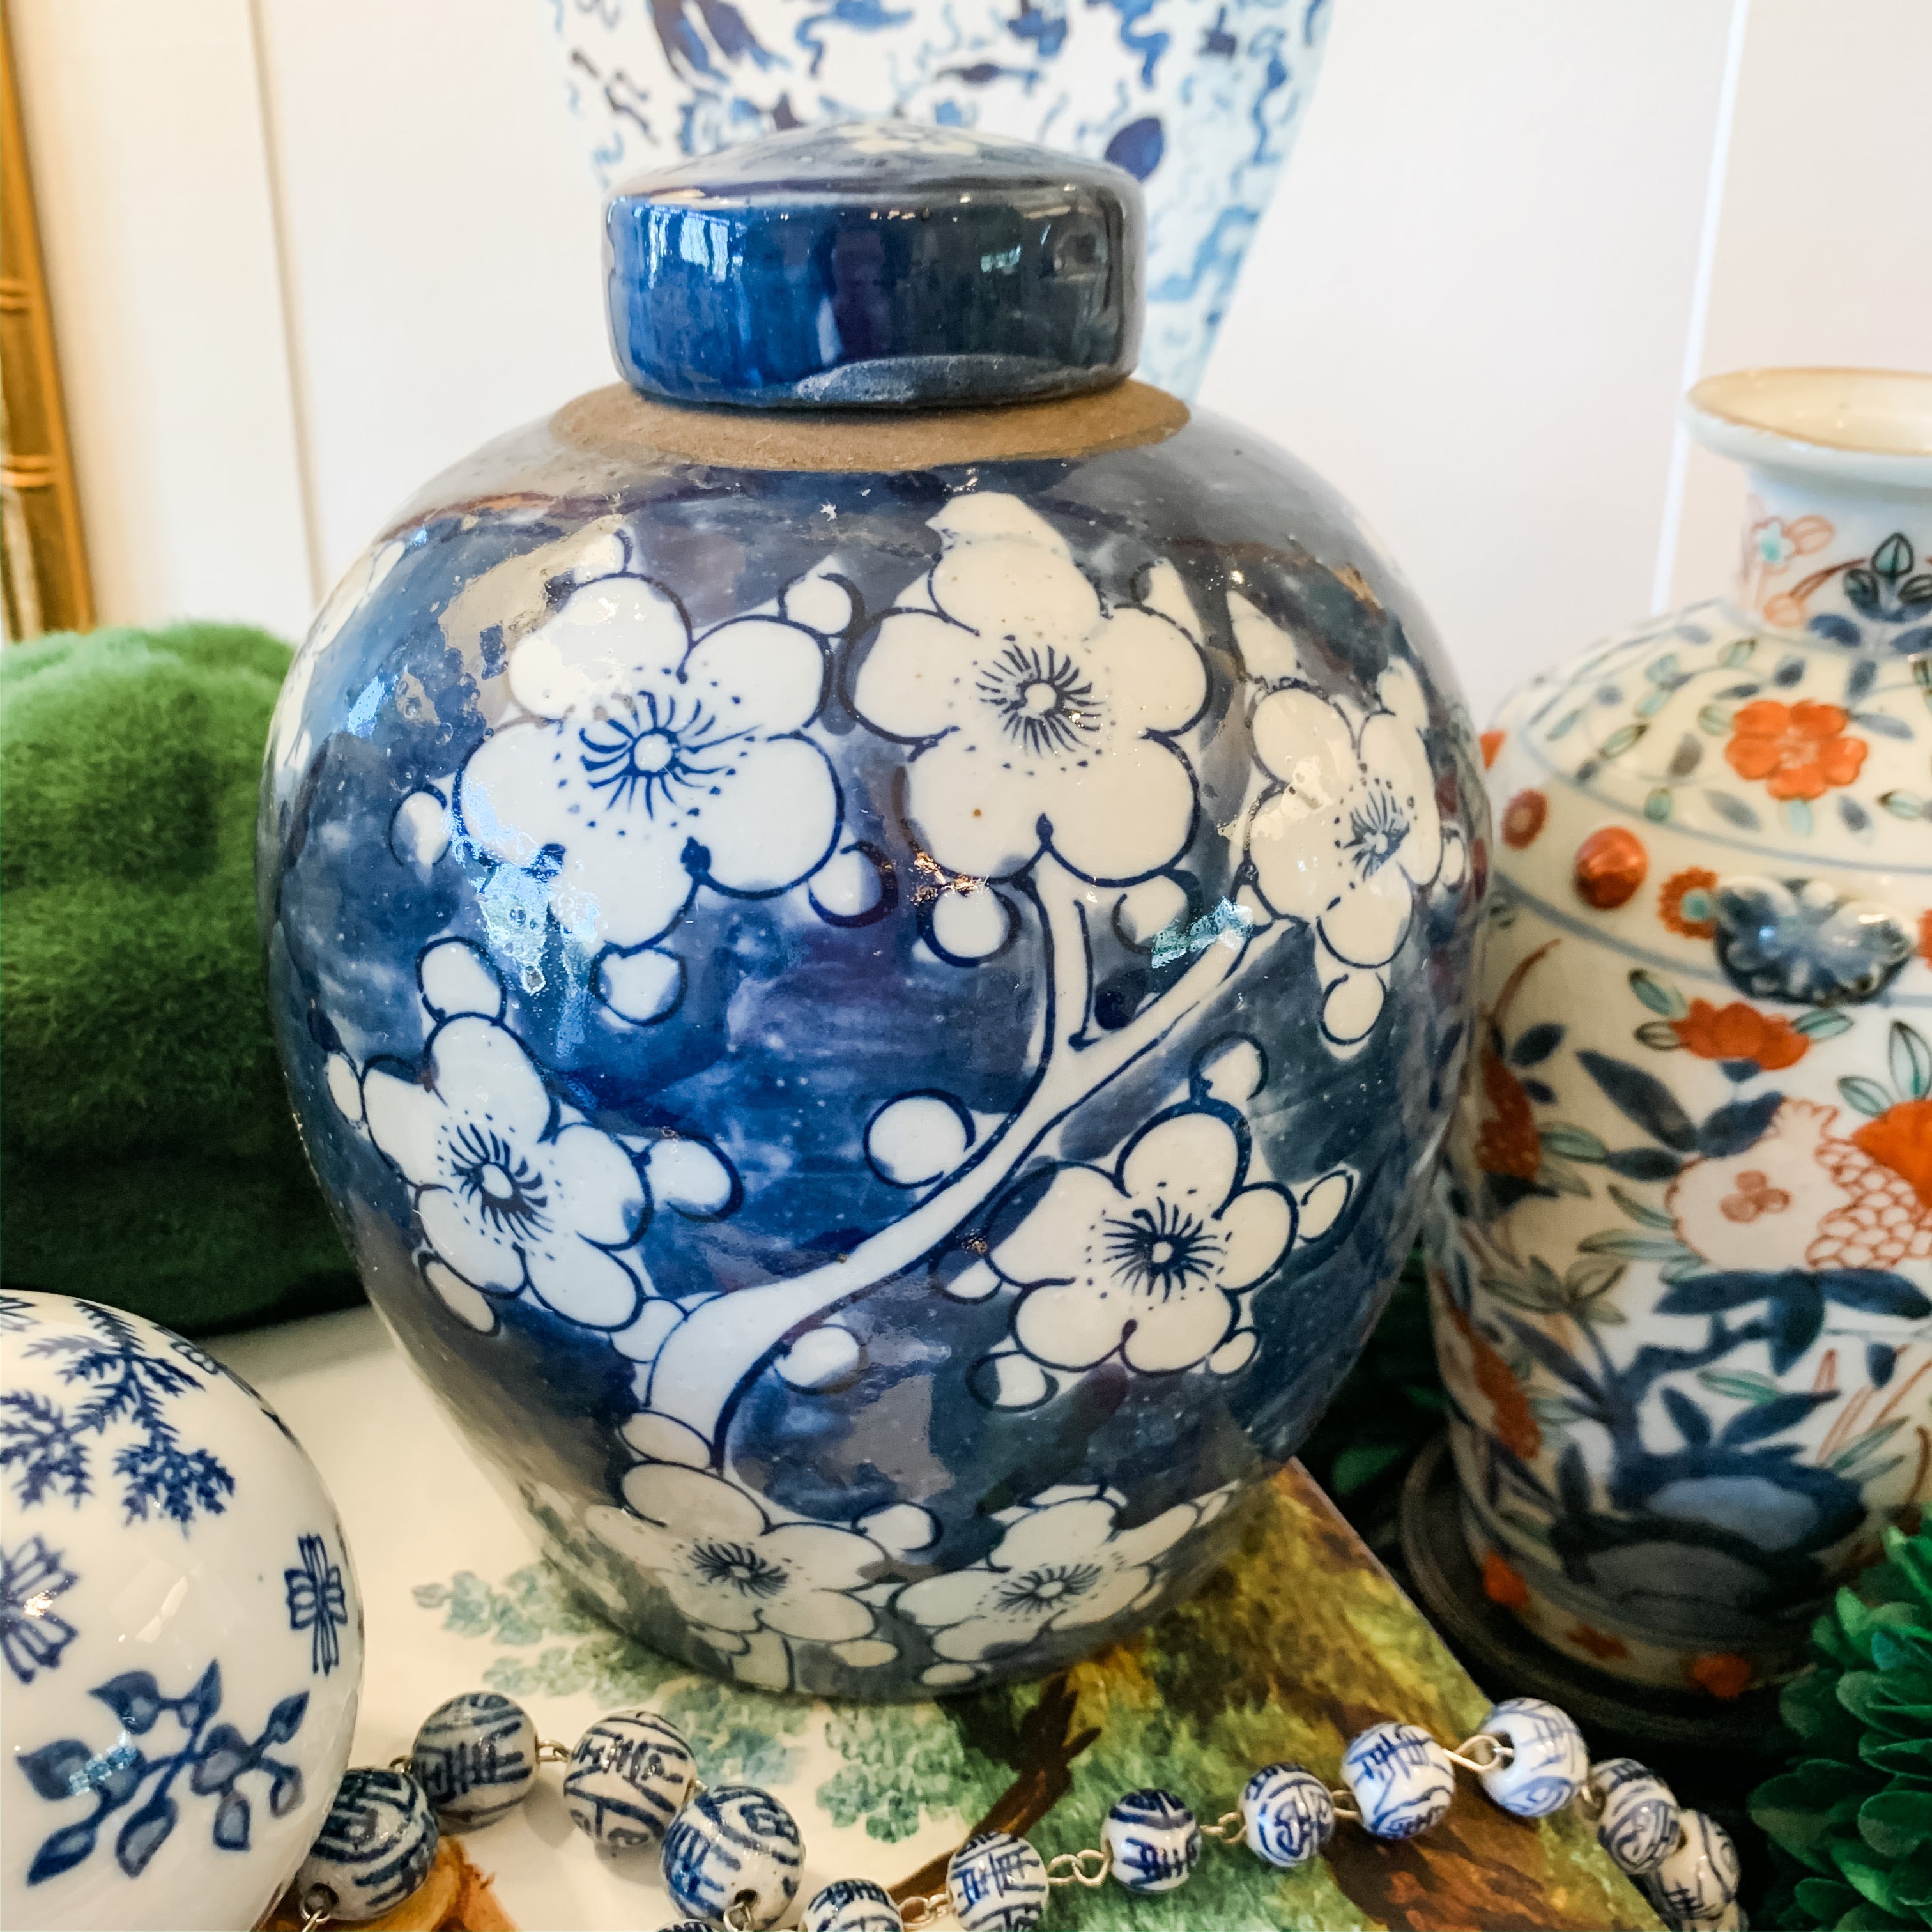 Shop Collectible Brooks for a wide selection of classic blue and white ginger jars, perfect for adding a touch of chinoiserie to your home decor!  This is a beautiful hand painted ginger jar featuring a prunus or cherry blossom design and measures 6.5" tall. 